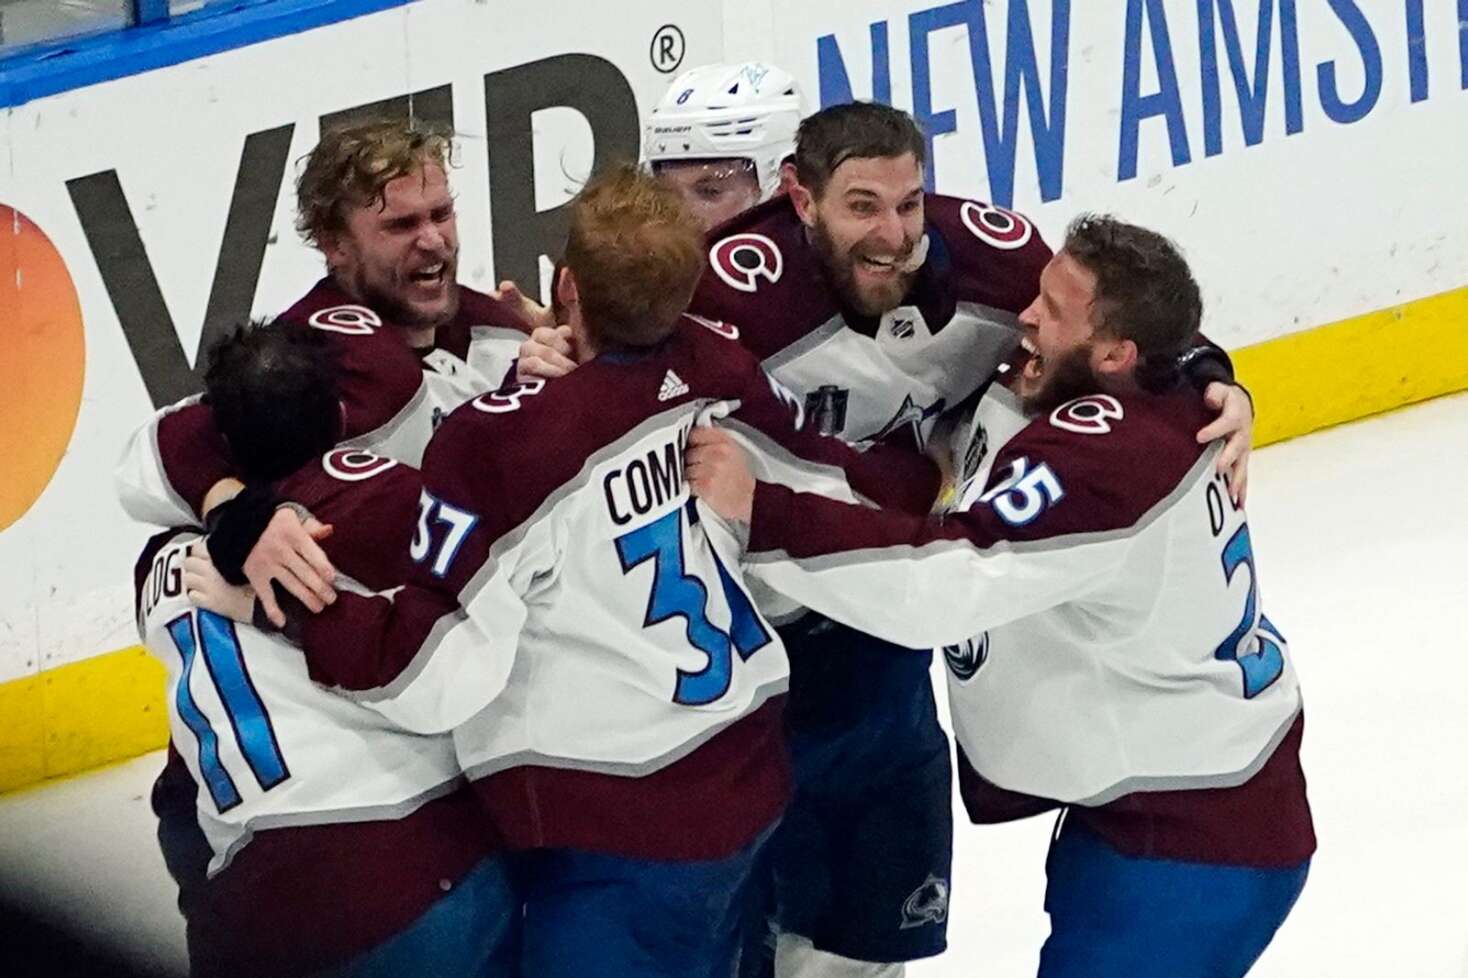 When was the last time the Colorado Avalanche won the Stanley Cup?